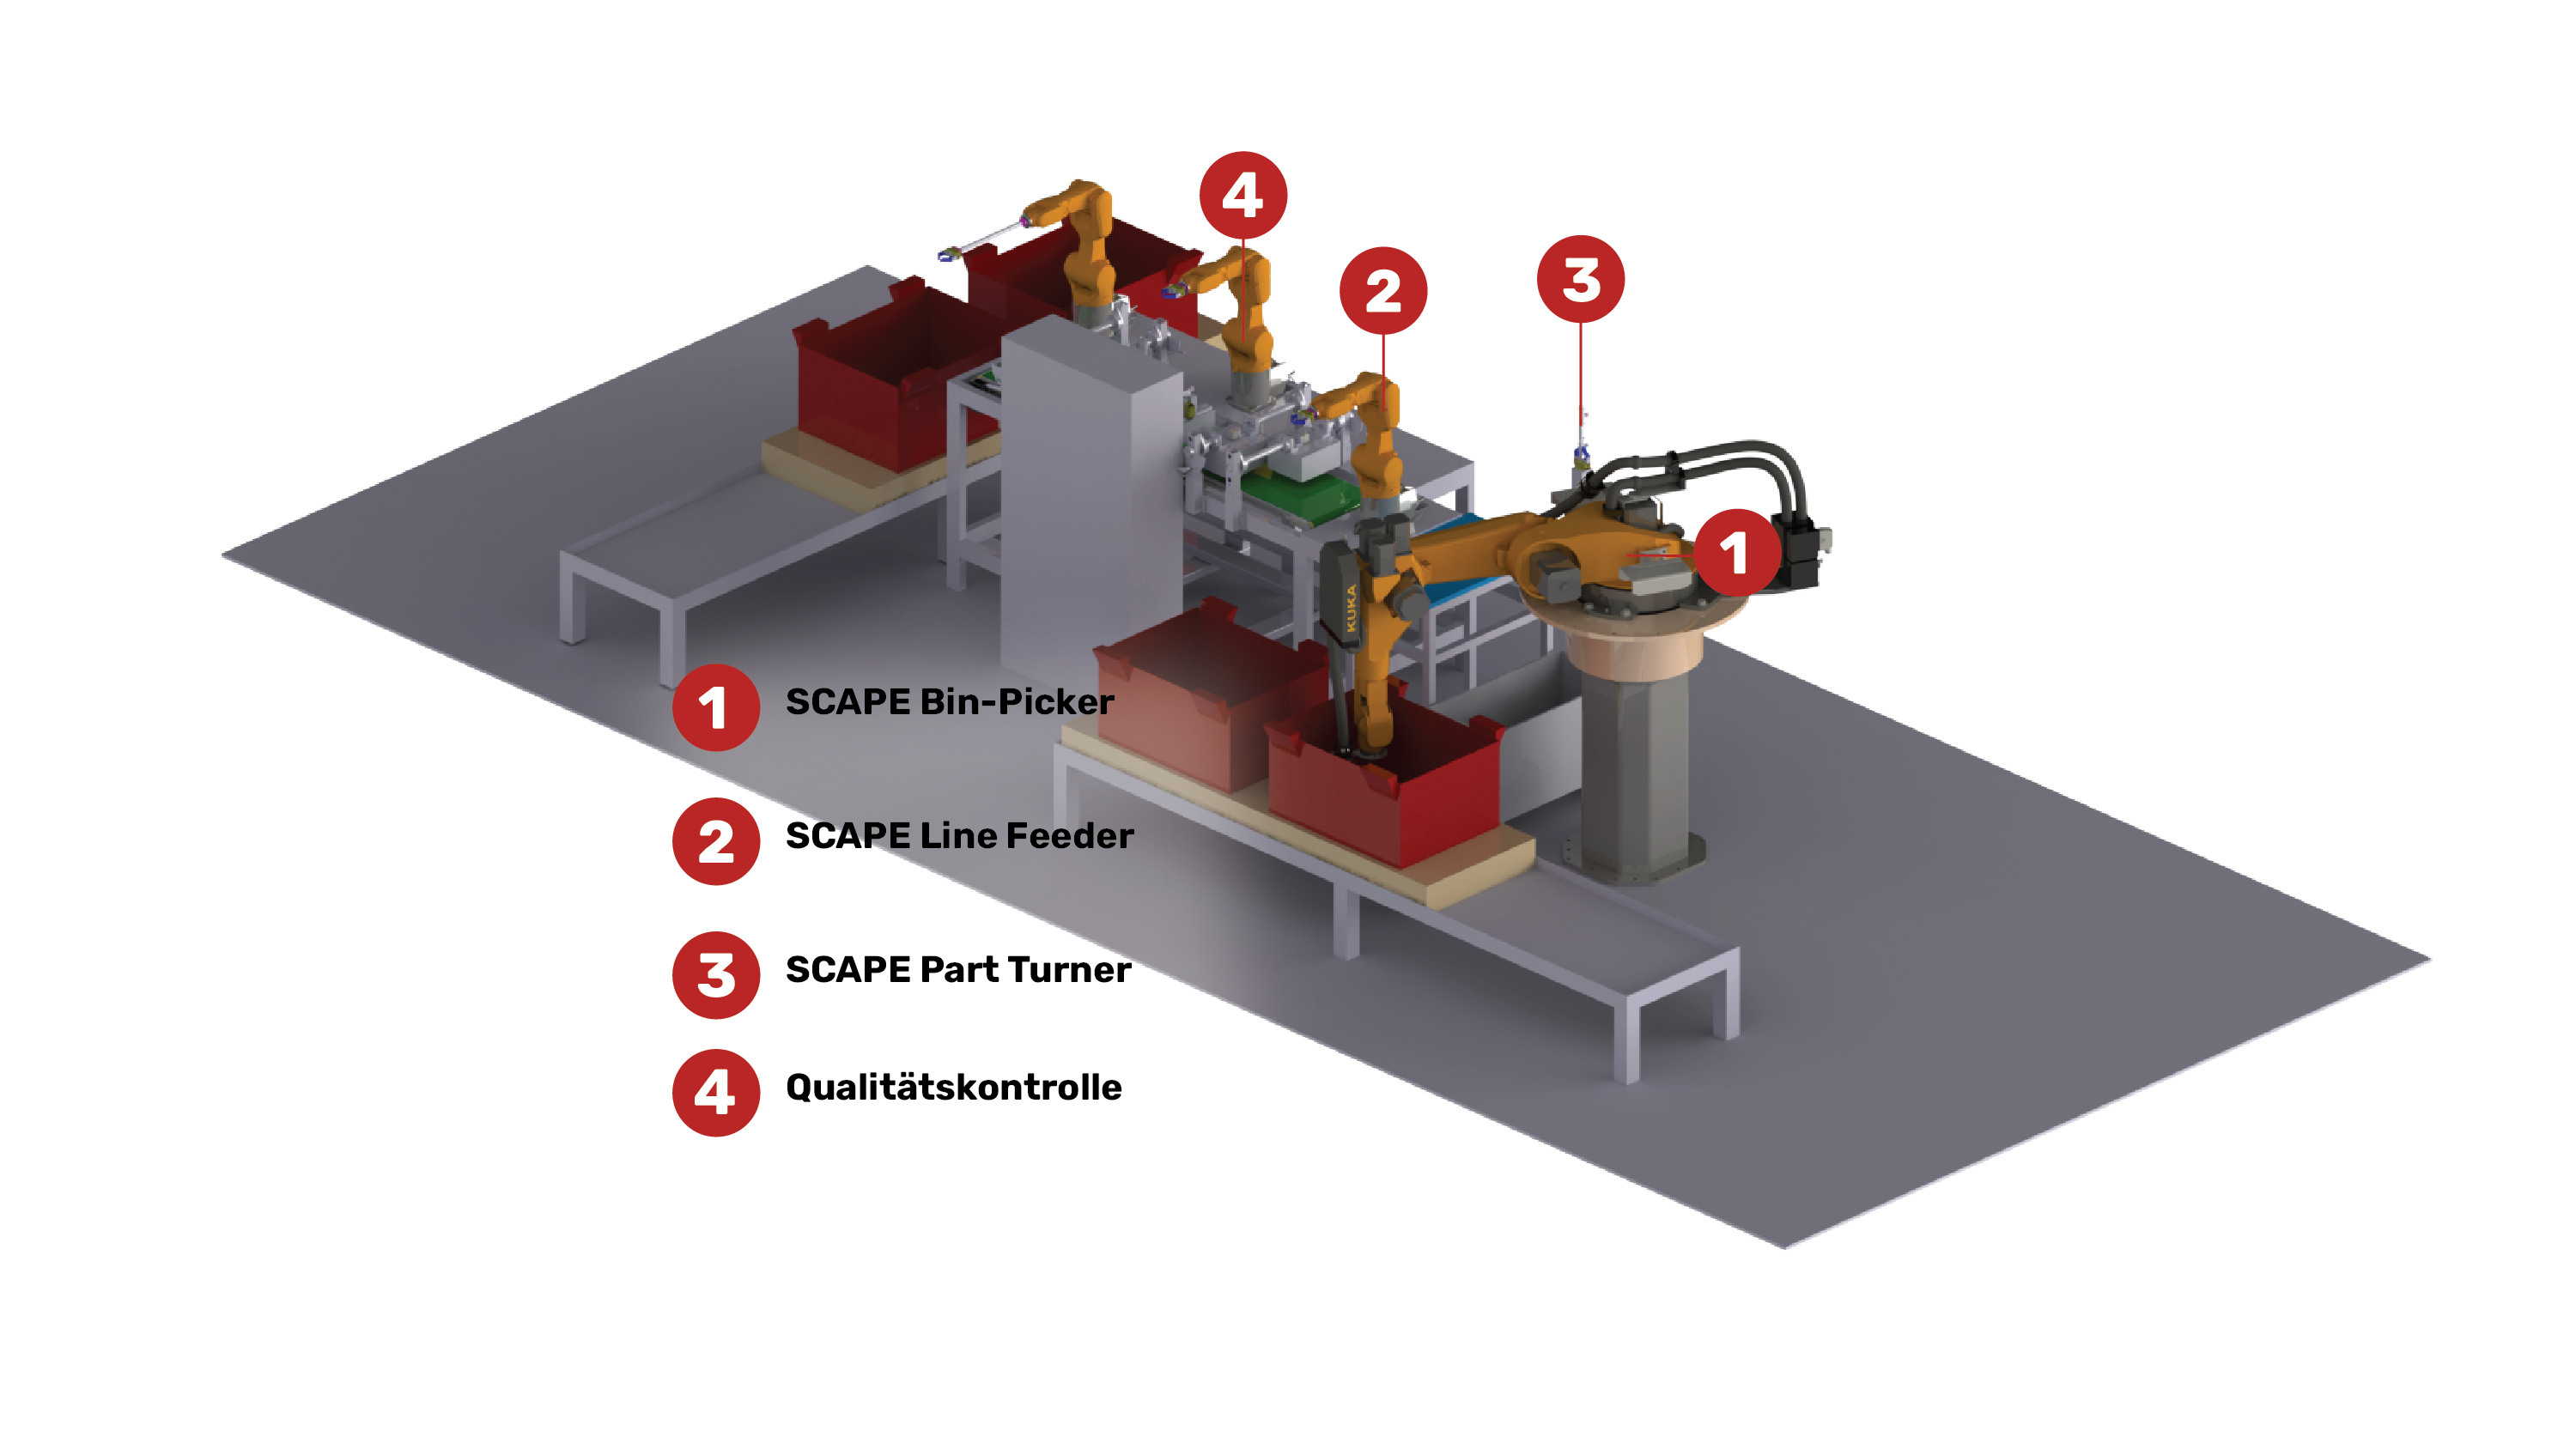 SCAPE Bin-Picking solution for car rails automation